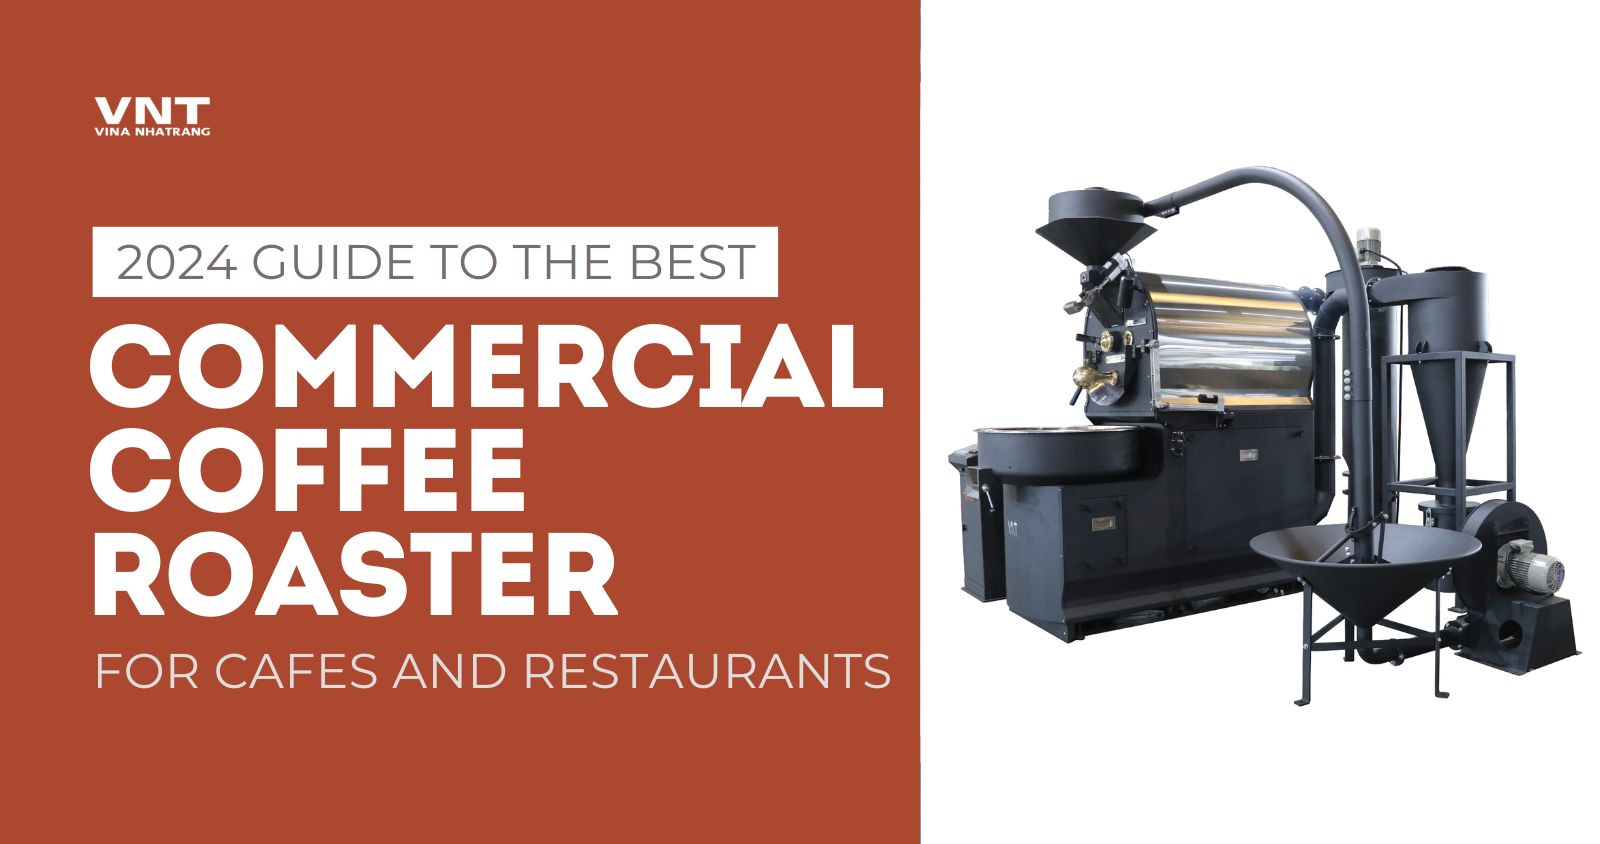 Best Commercial Coffee Roaster for Small Cafes & Restaurants